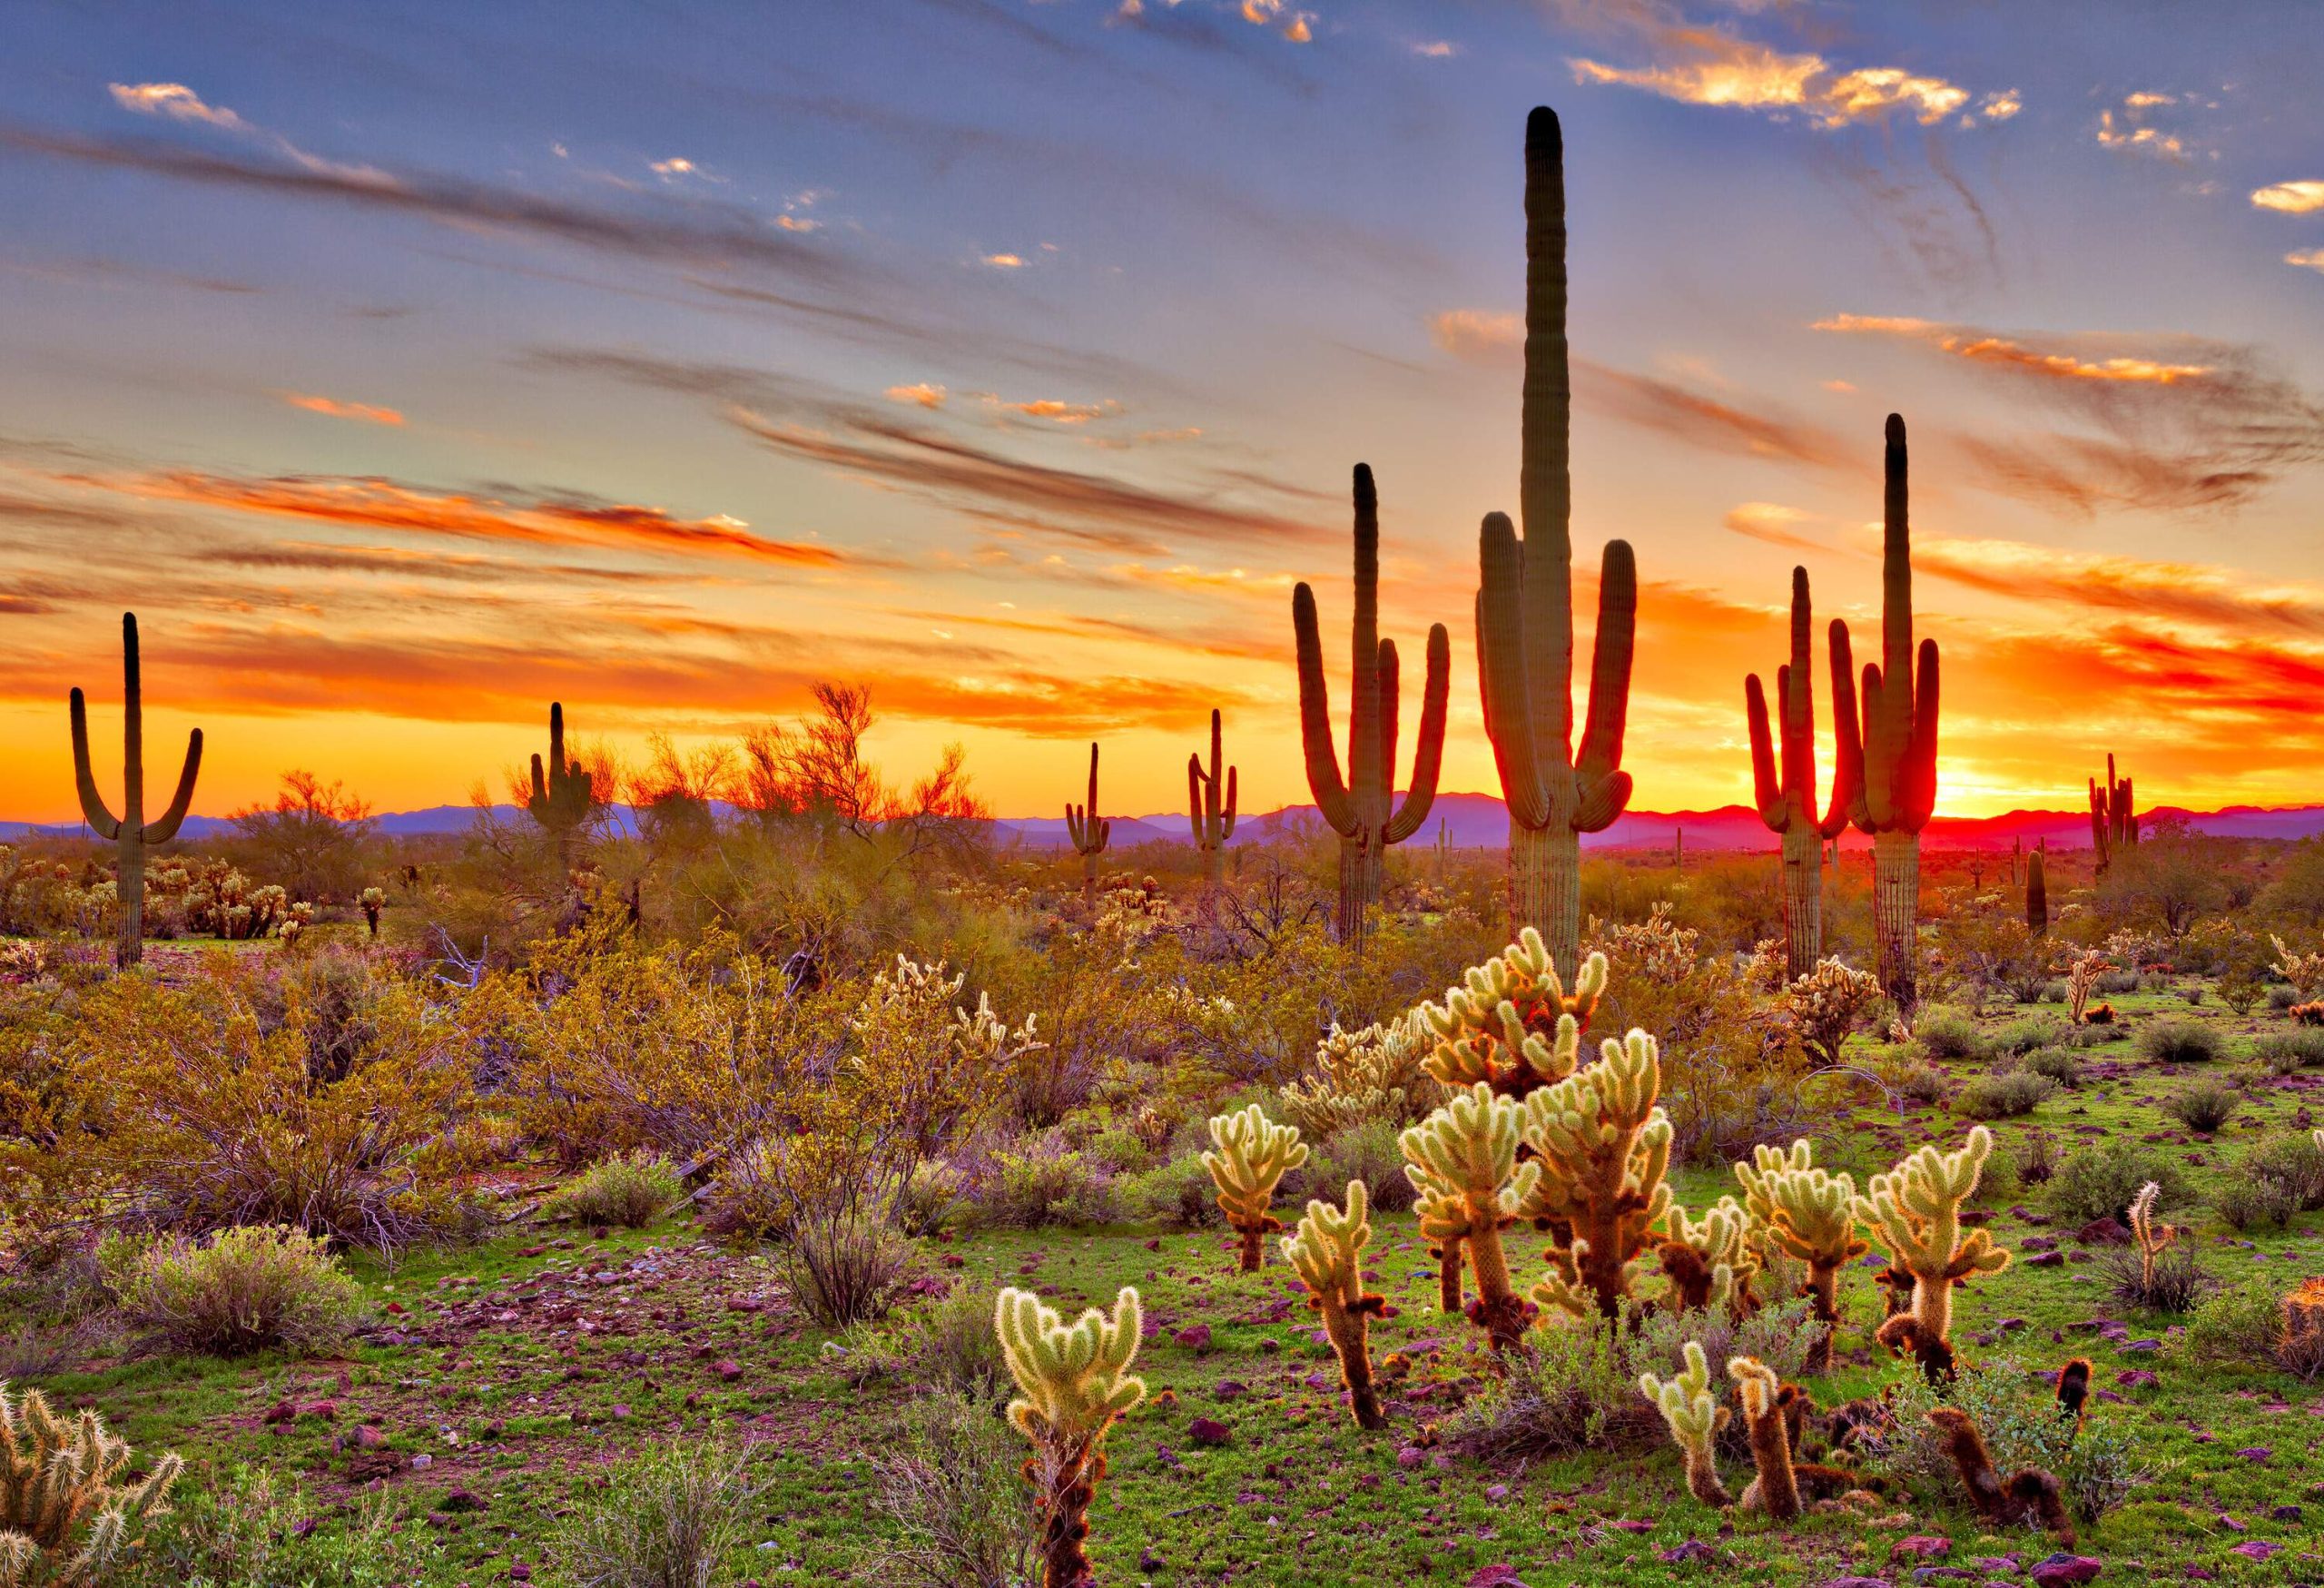 A grassy wilderness with a collection of small and big cactus plants against the backdrop of vibrant sunset skies.